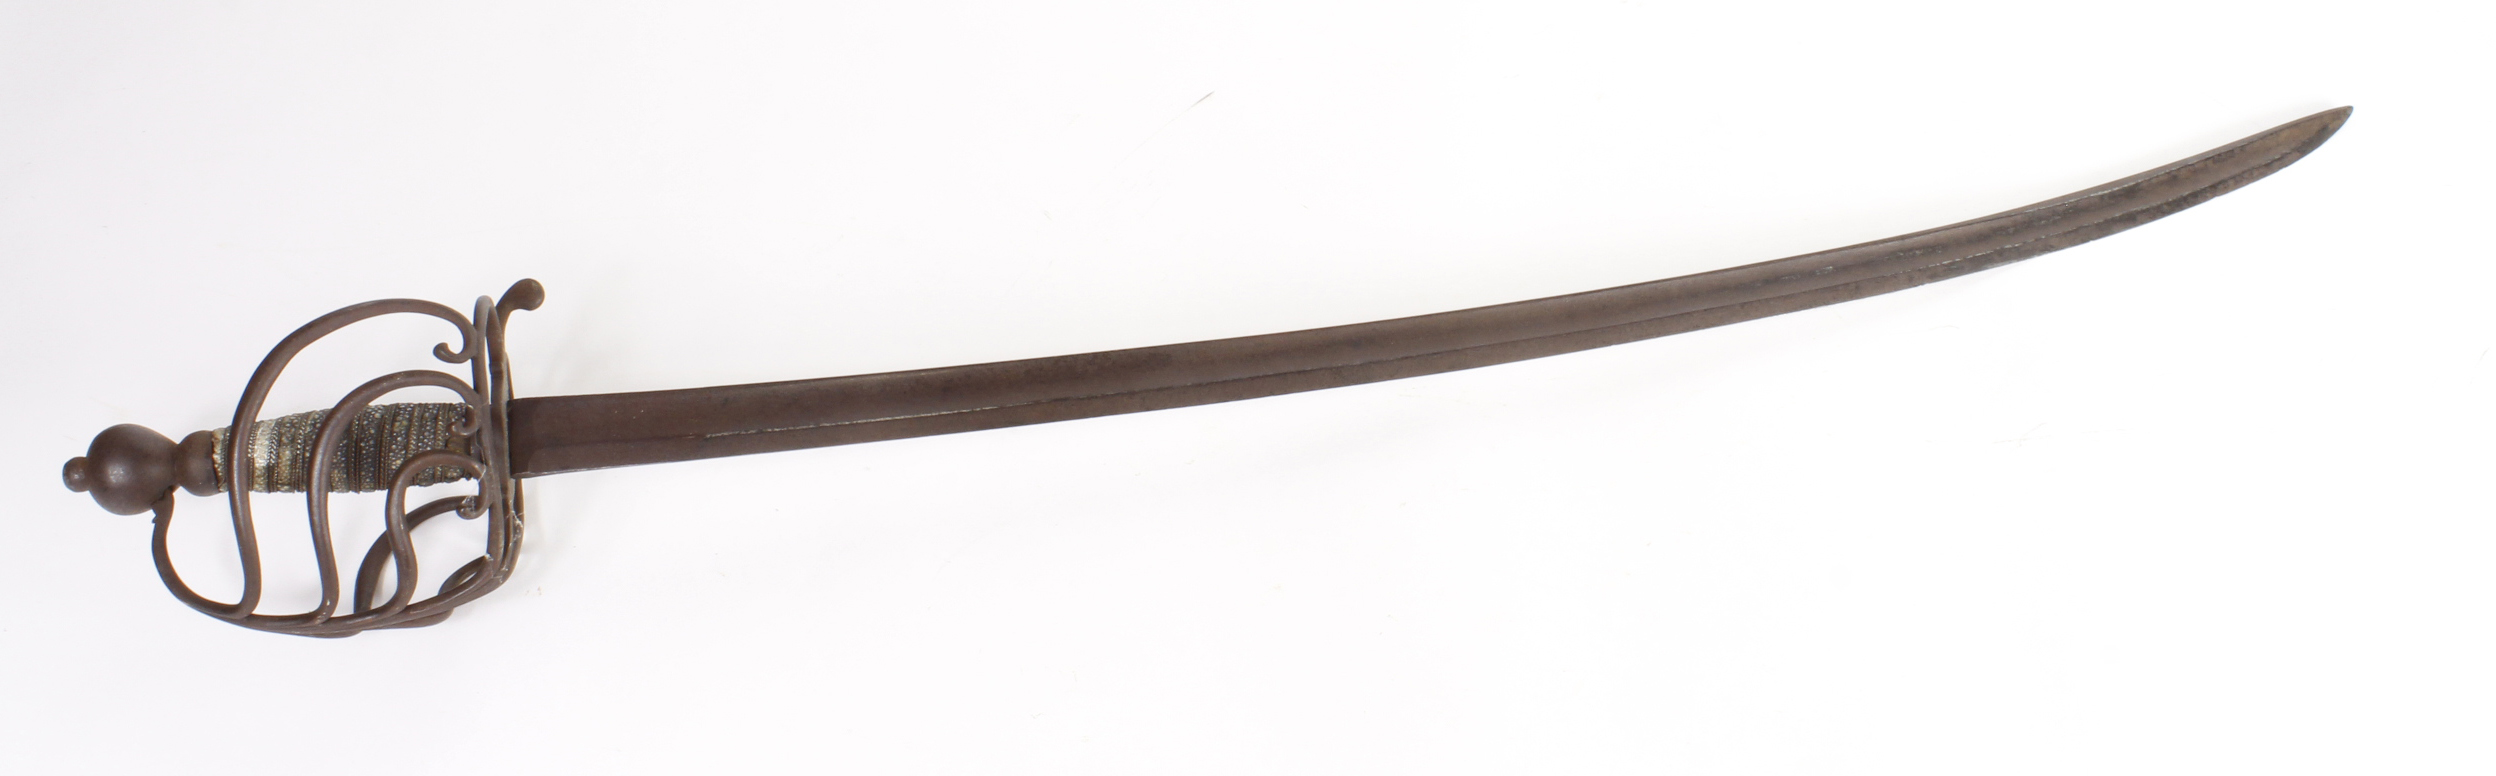 Sword 18th century officers side arm with basket type hilt, fish skin grip 30" long curved blade.